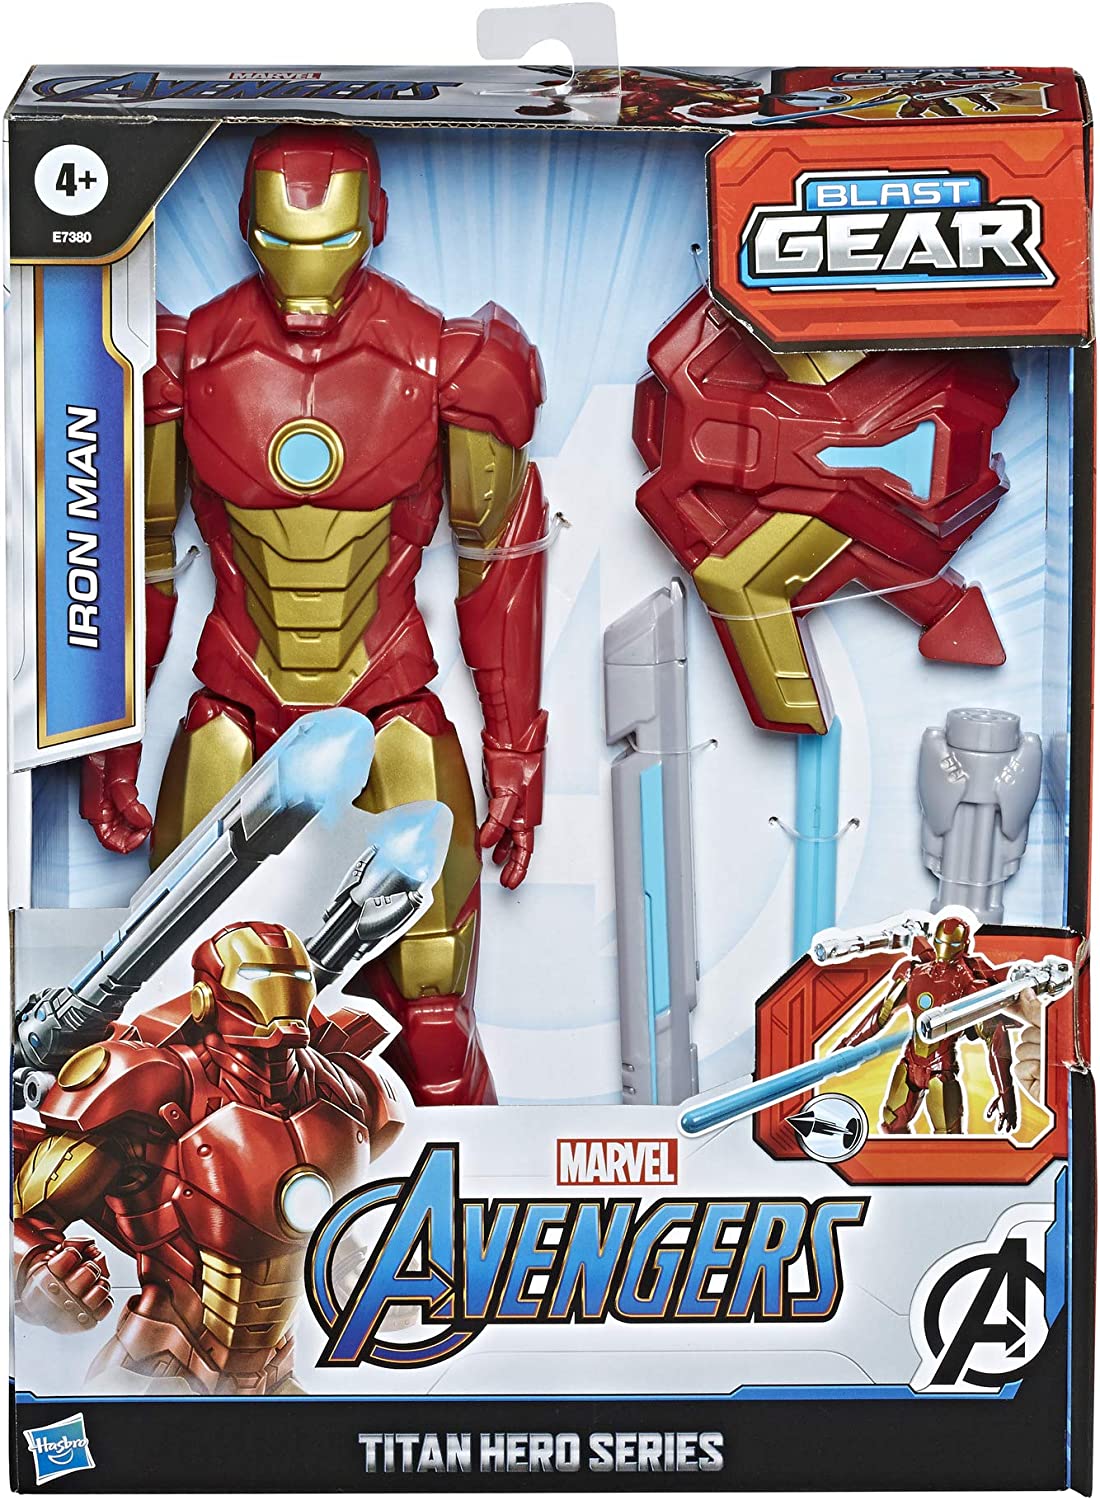 Avengers Marvel Titan Hero Series Blast Gear Iron Man Action Figure, 12-Inch Toy, with Launcher, 2 Accessories and Projectile